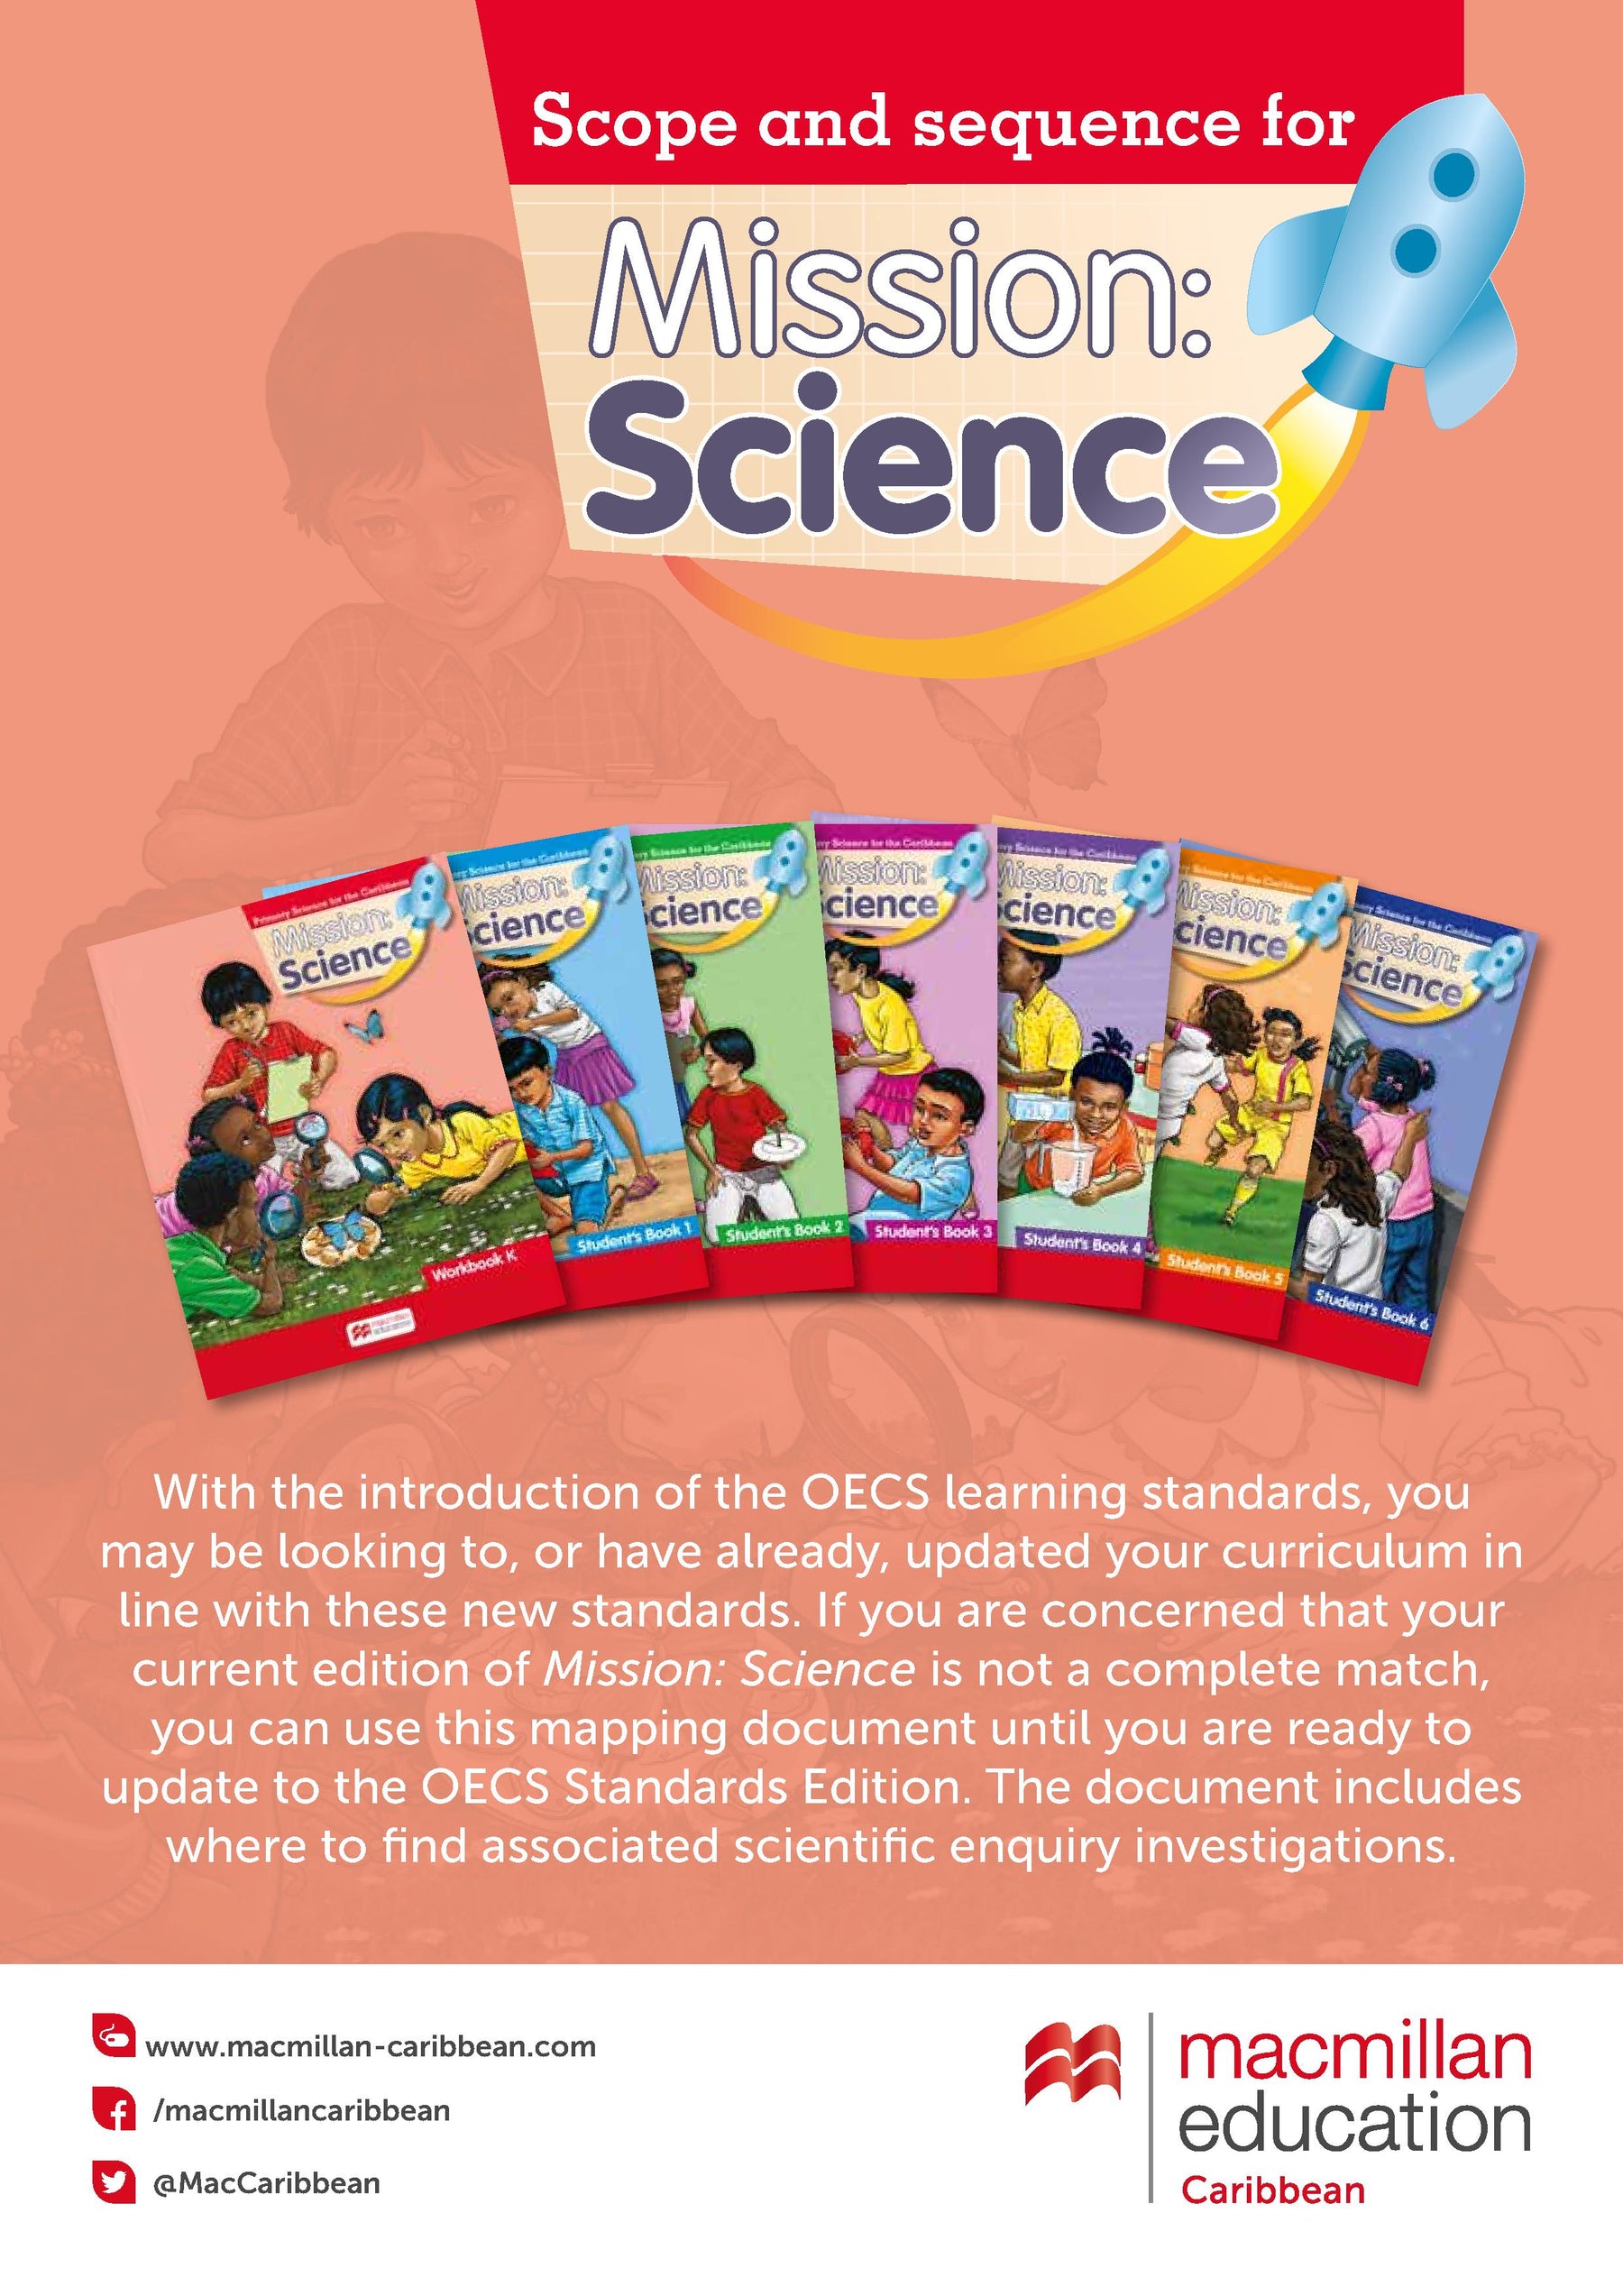 MISSION: SCIENCE Mapping document for the OECS standard